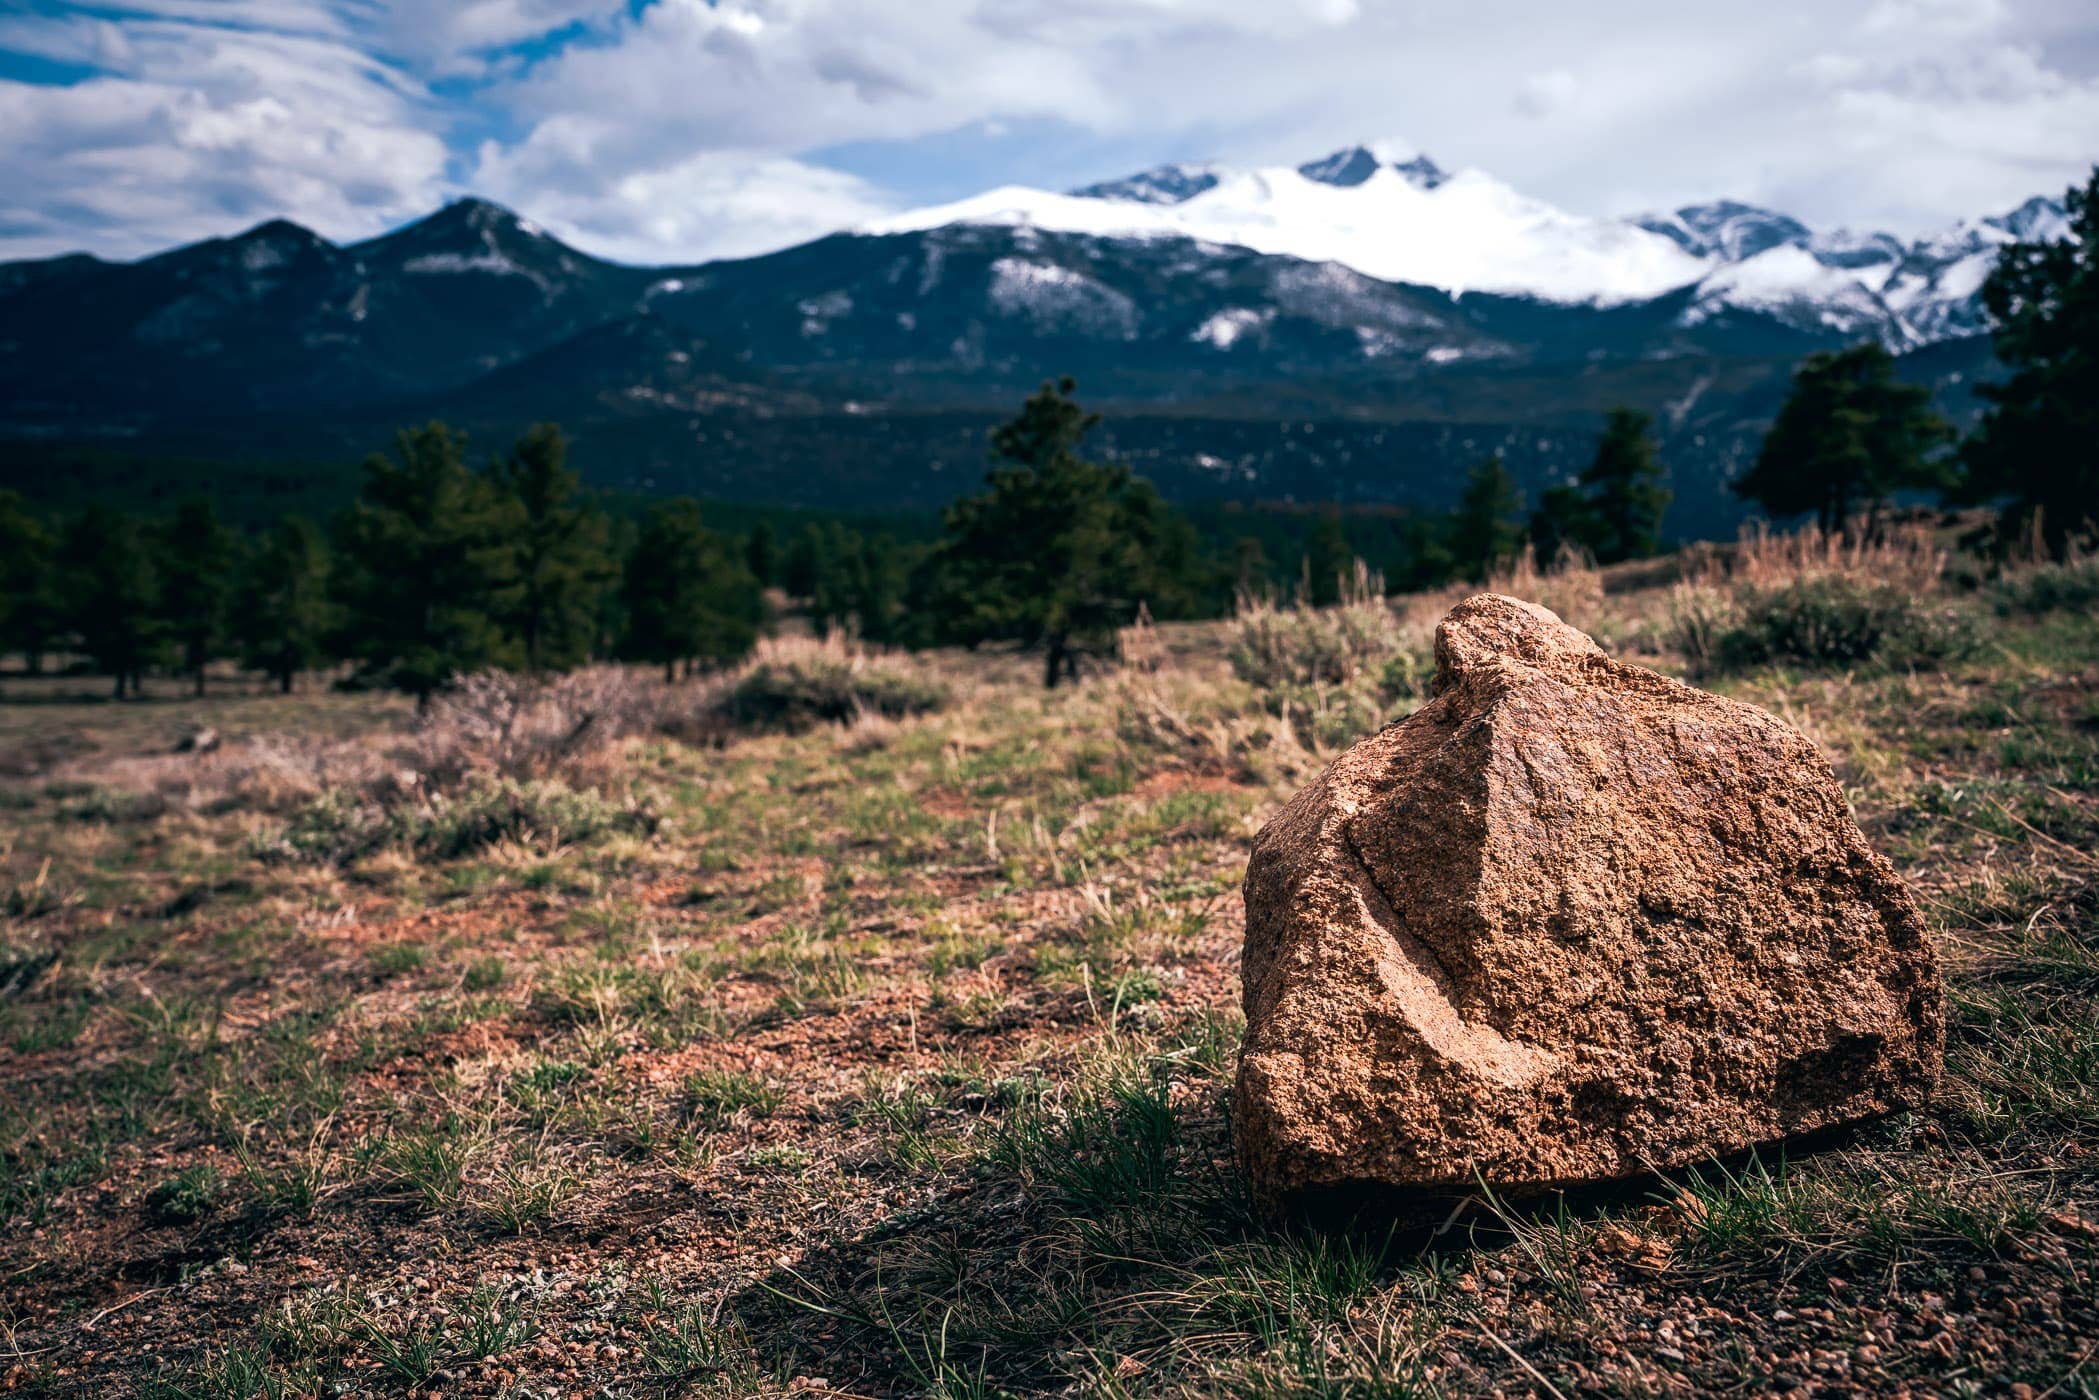 Snow-capped mountains loom over a rock at Colorado's Rocky Mountain National Park.